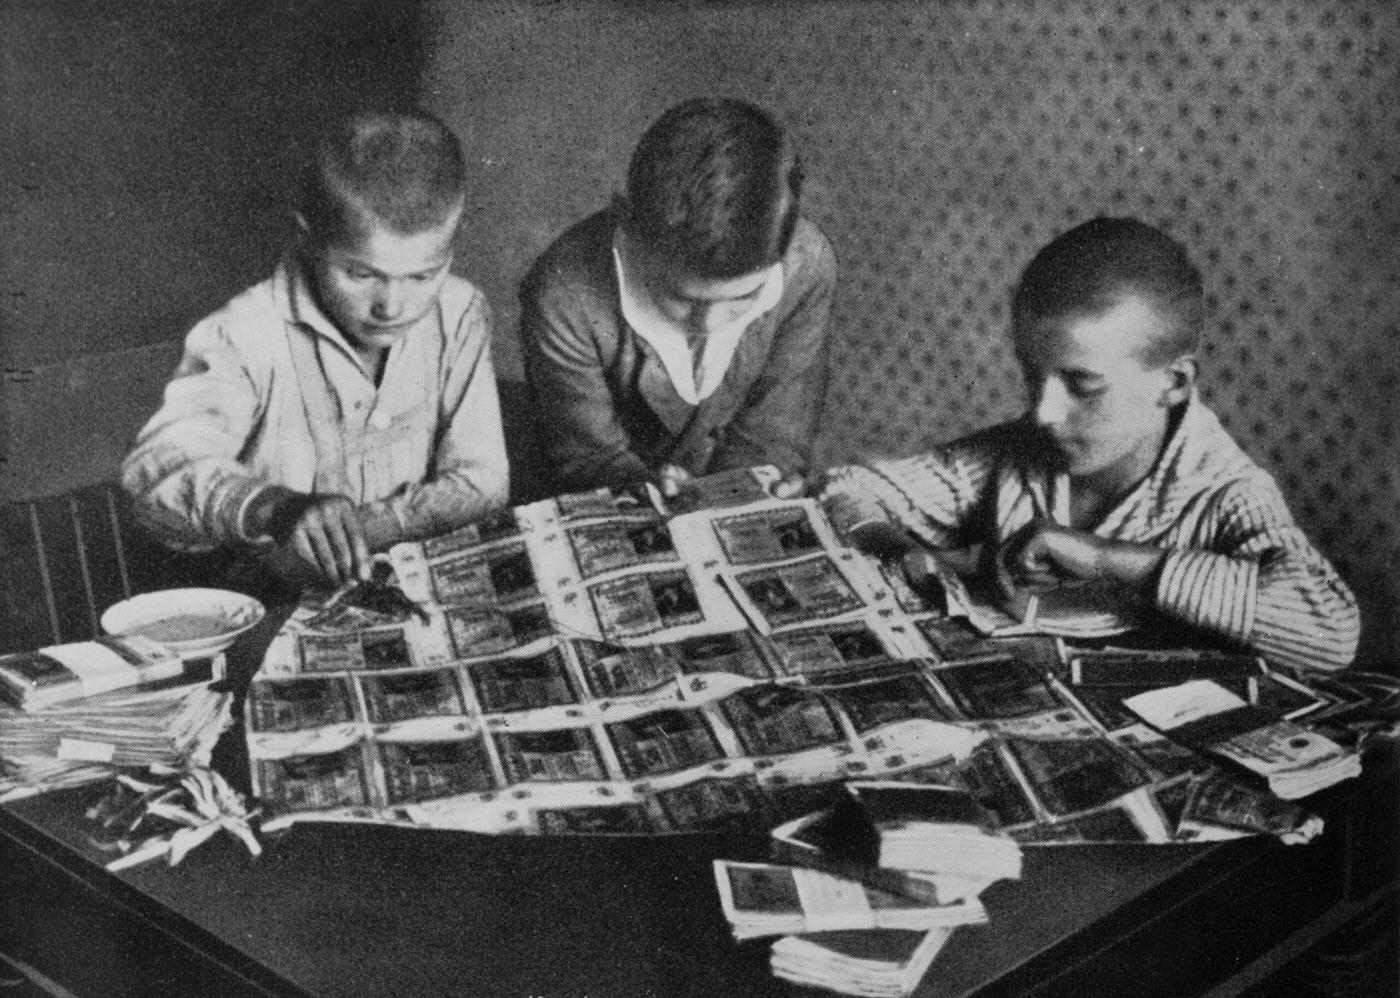 Children play with worthless money during post-war hyperinflation in Germany, circa 1923.